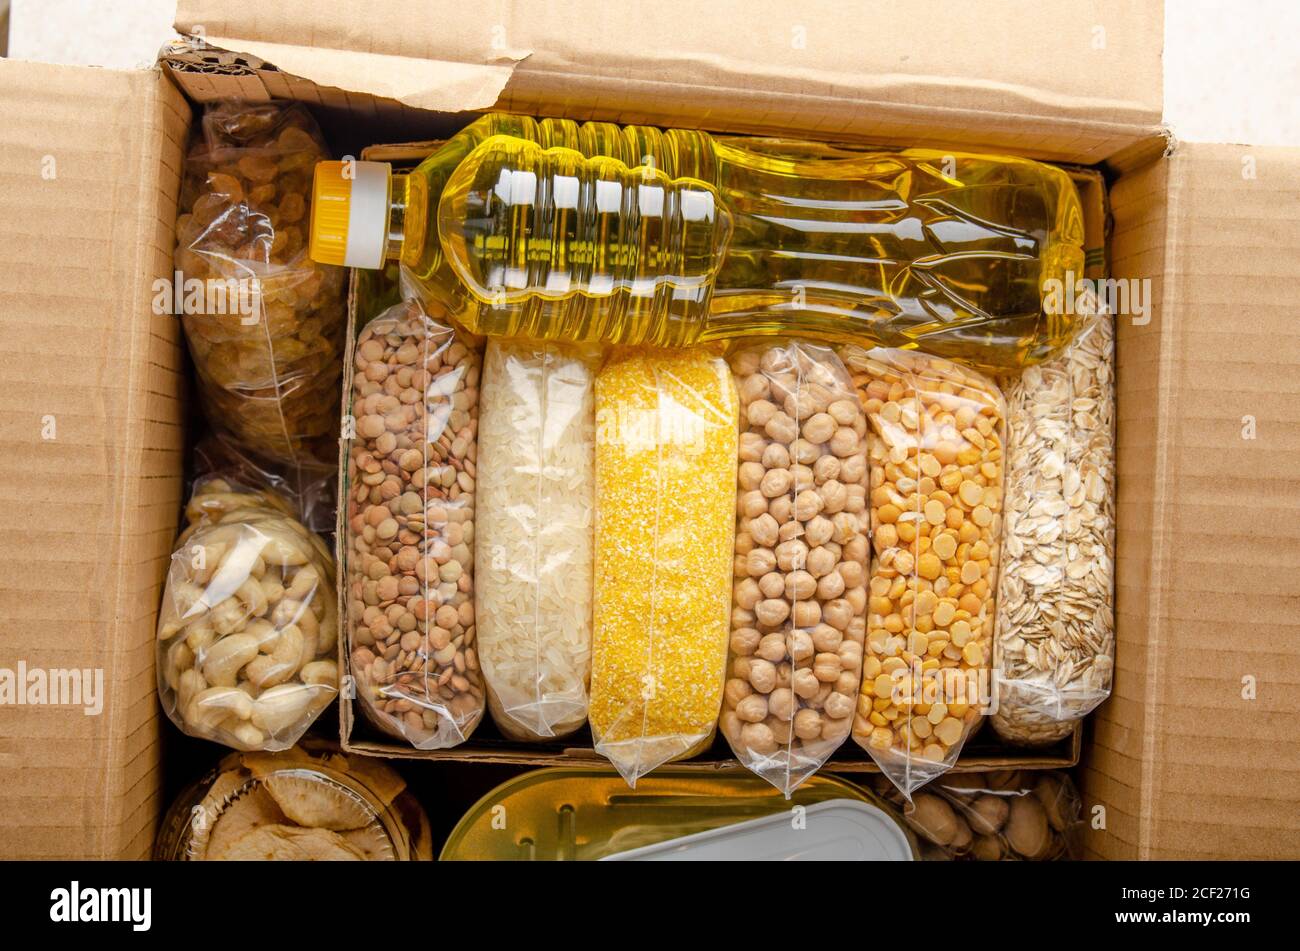 Flat lay view at uncooked foods in carton box prepared for disaster emergency conditions or giving away. Stock Photo